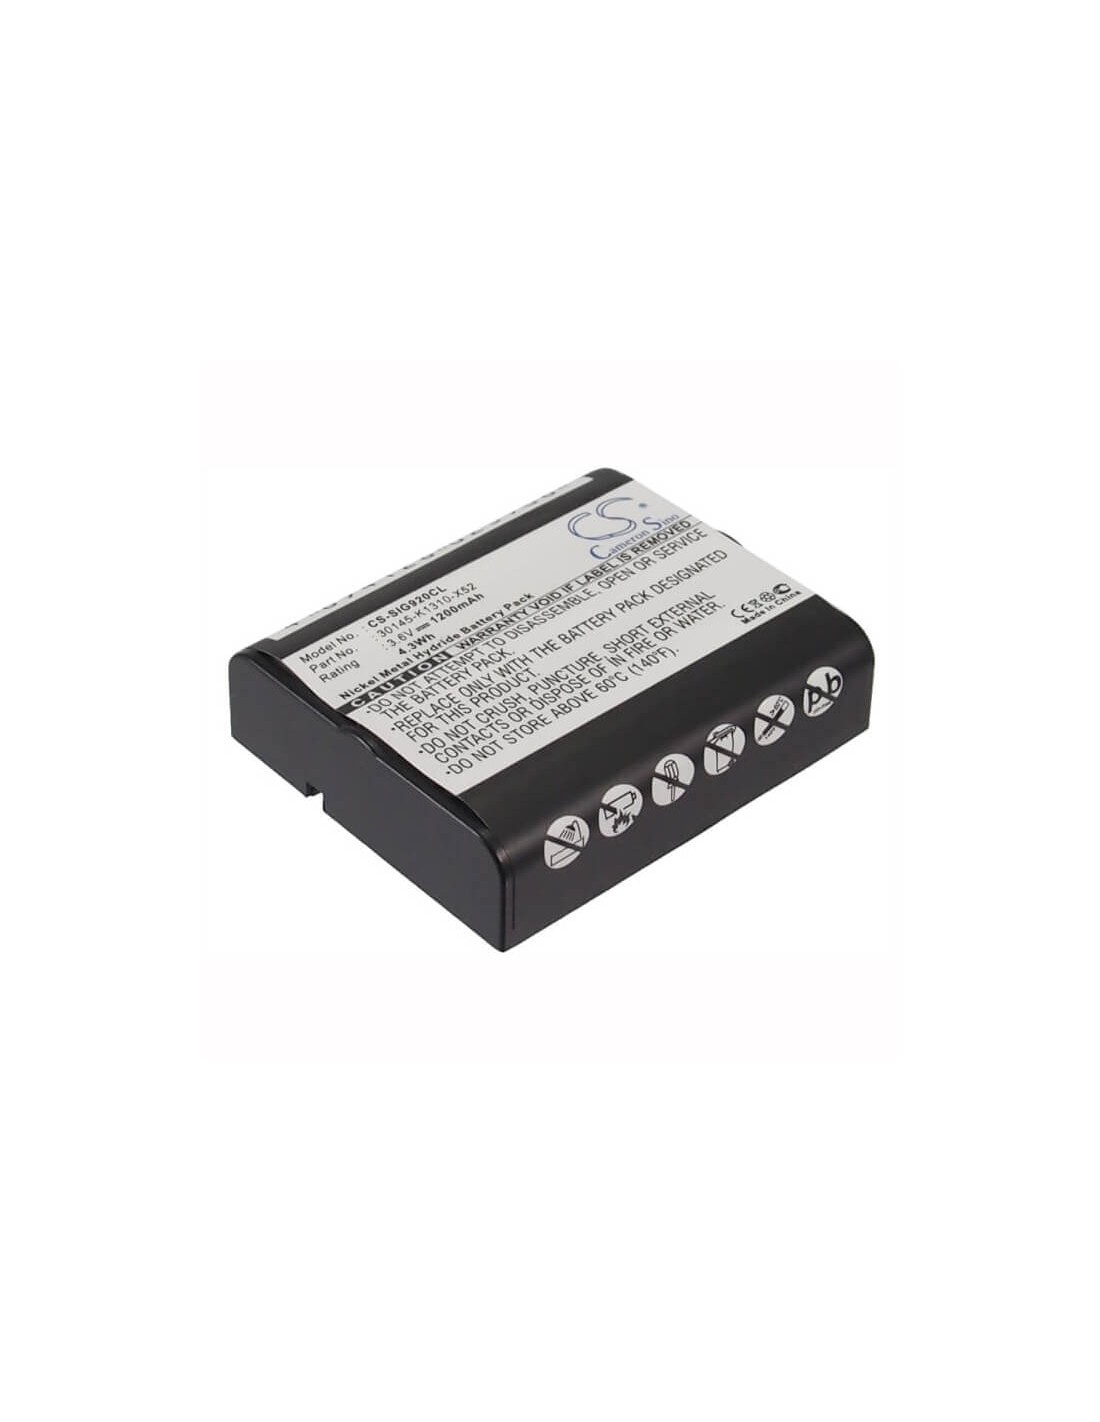 Battery for Mbo, Alpha 1400ct 3.6V, 1200mAh - 4.32Wh